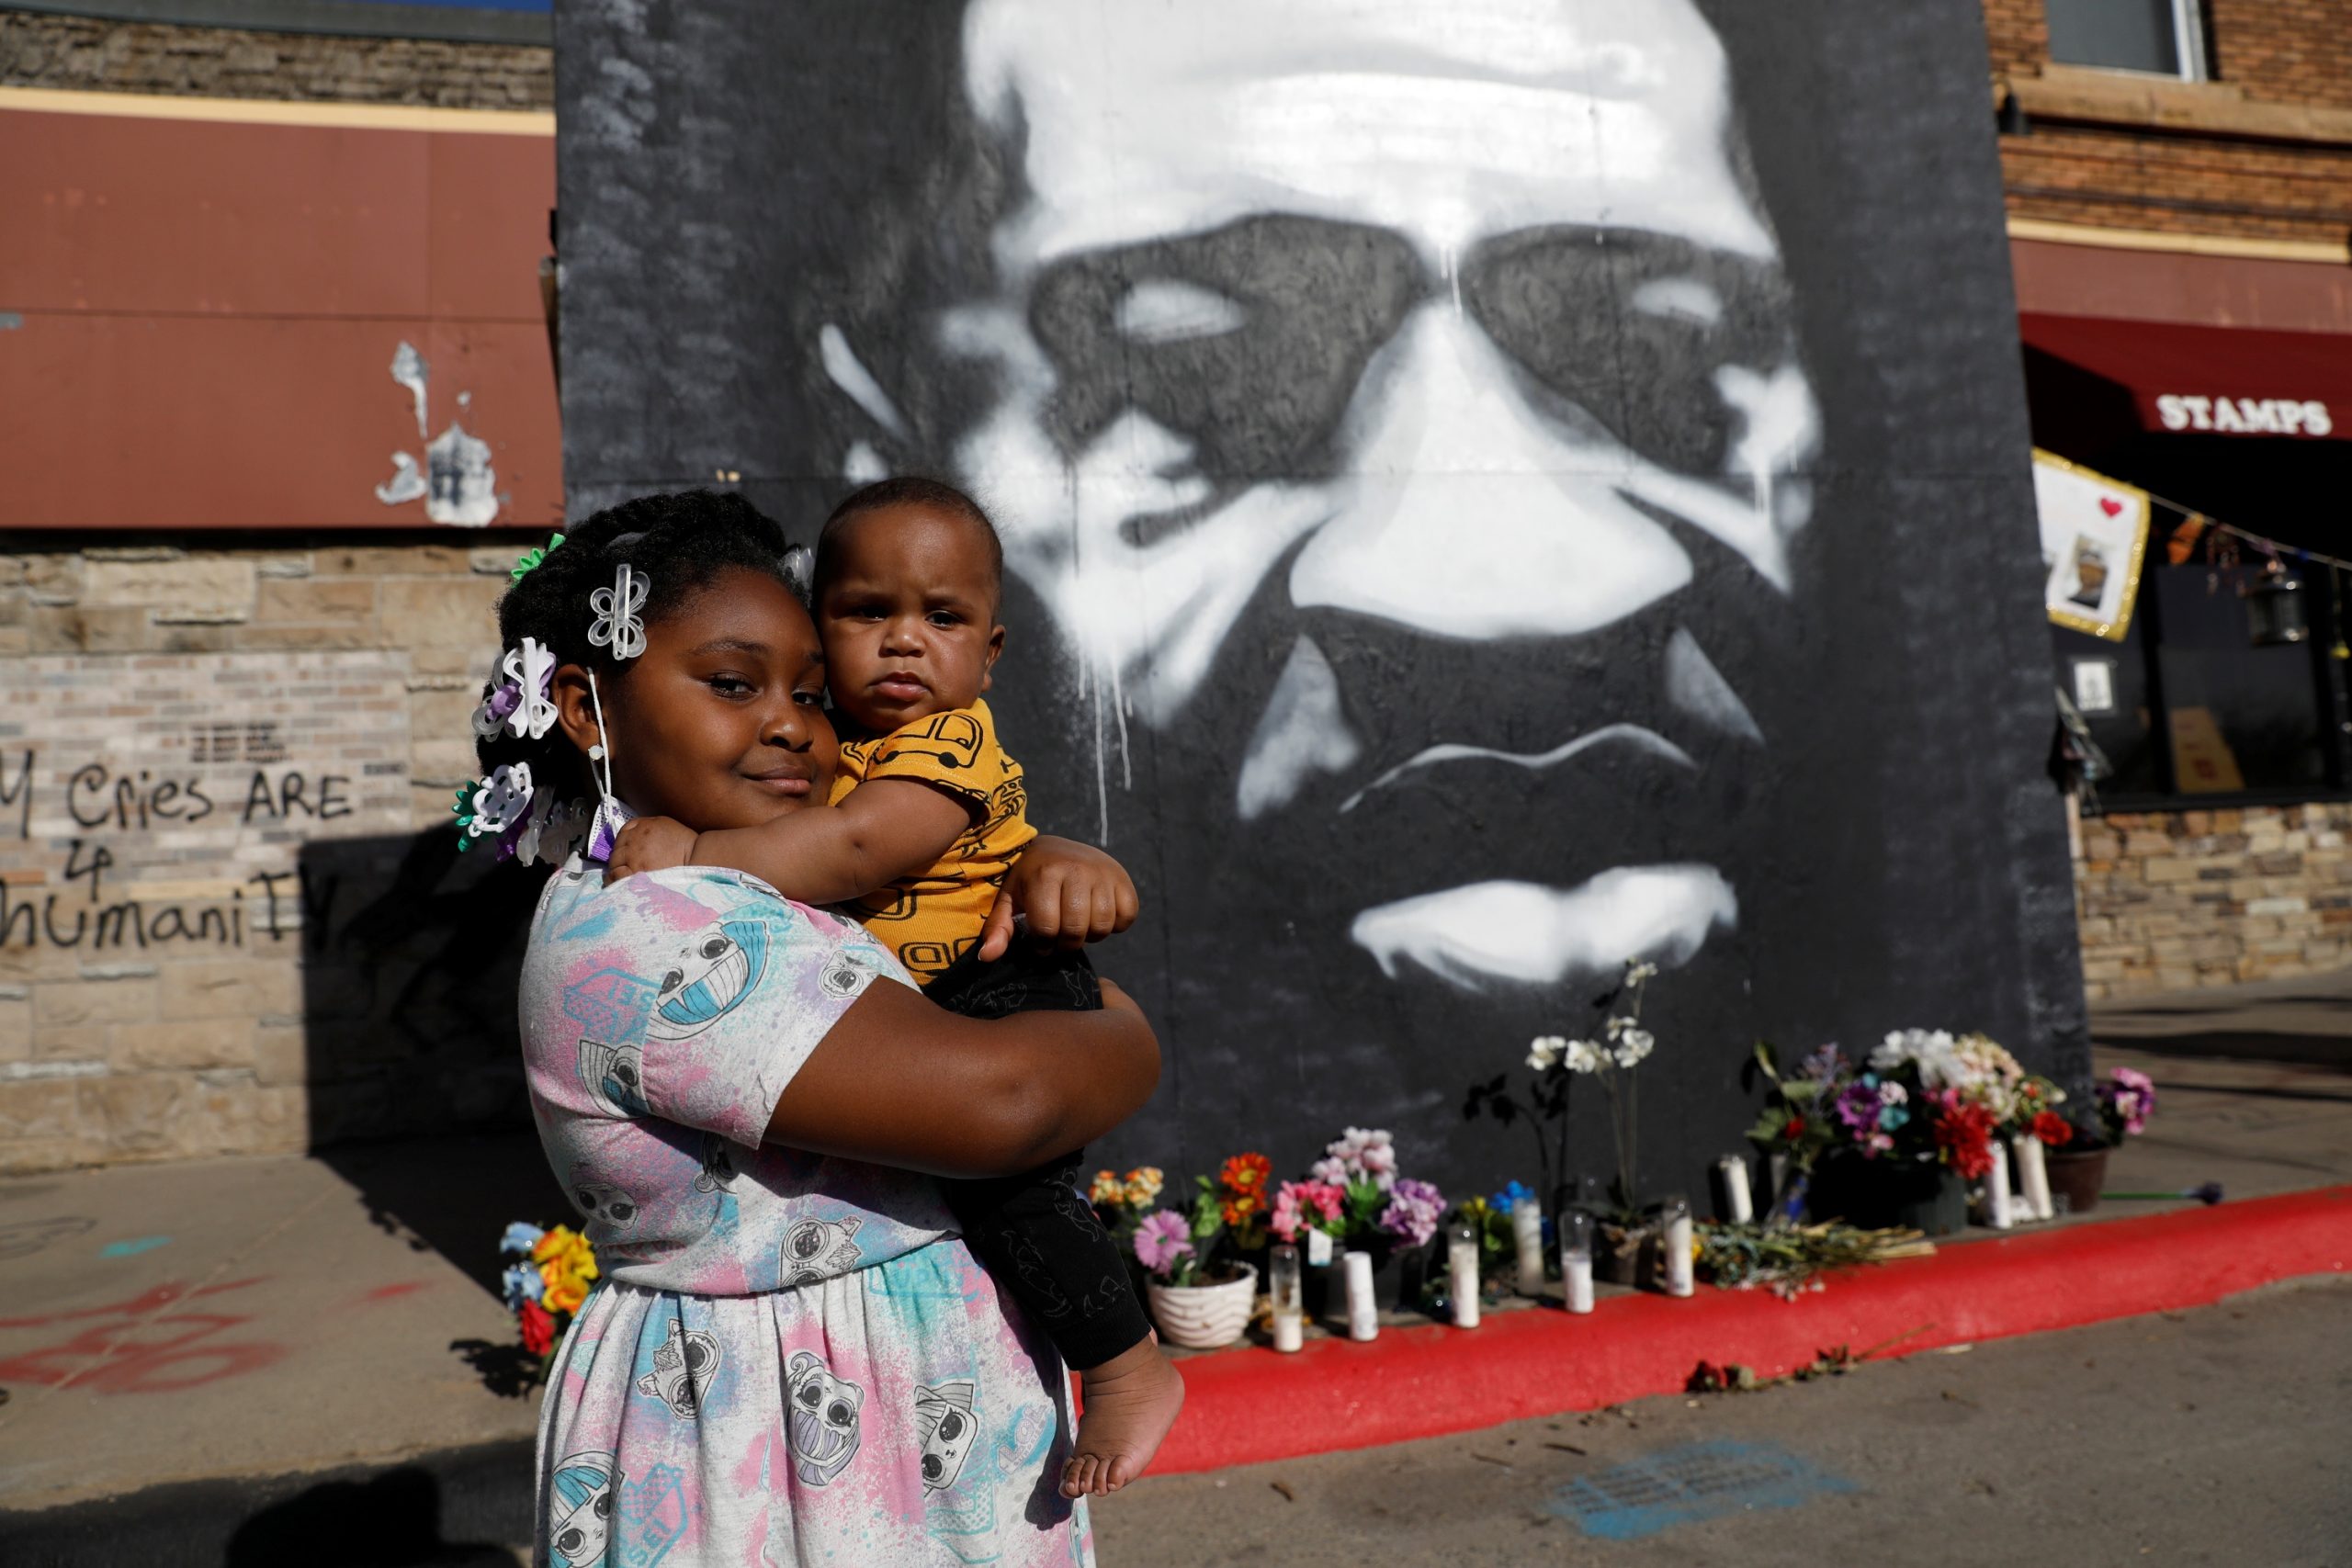 Visitors at George Floyd Square in Minneapolis Journey Stephens holds her 6-month-old brother Dreshoan at George Floyd Square, after the first week in the trial of Derek Chauvin, who is facing murder charges in the death of George Floyd, in Minneapolis, Minnesota, U.S., April 3, 2021. REUTERS/Octavio Jones OCTAVIO JONES